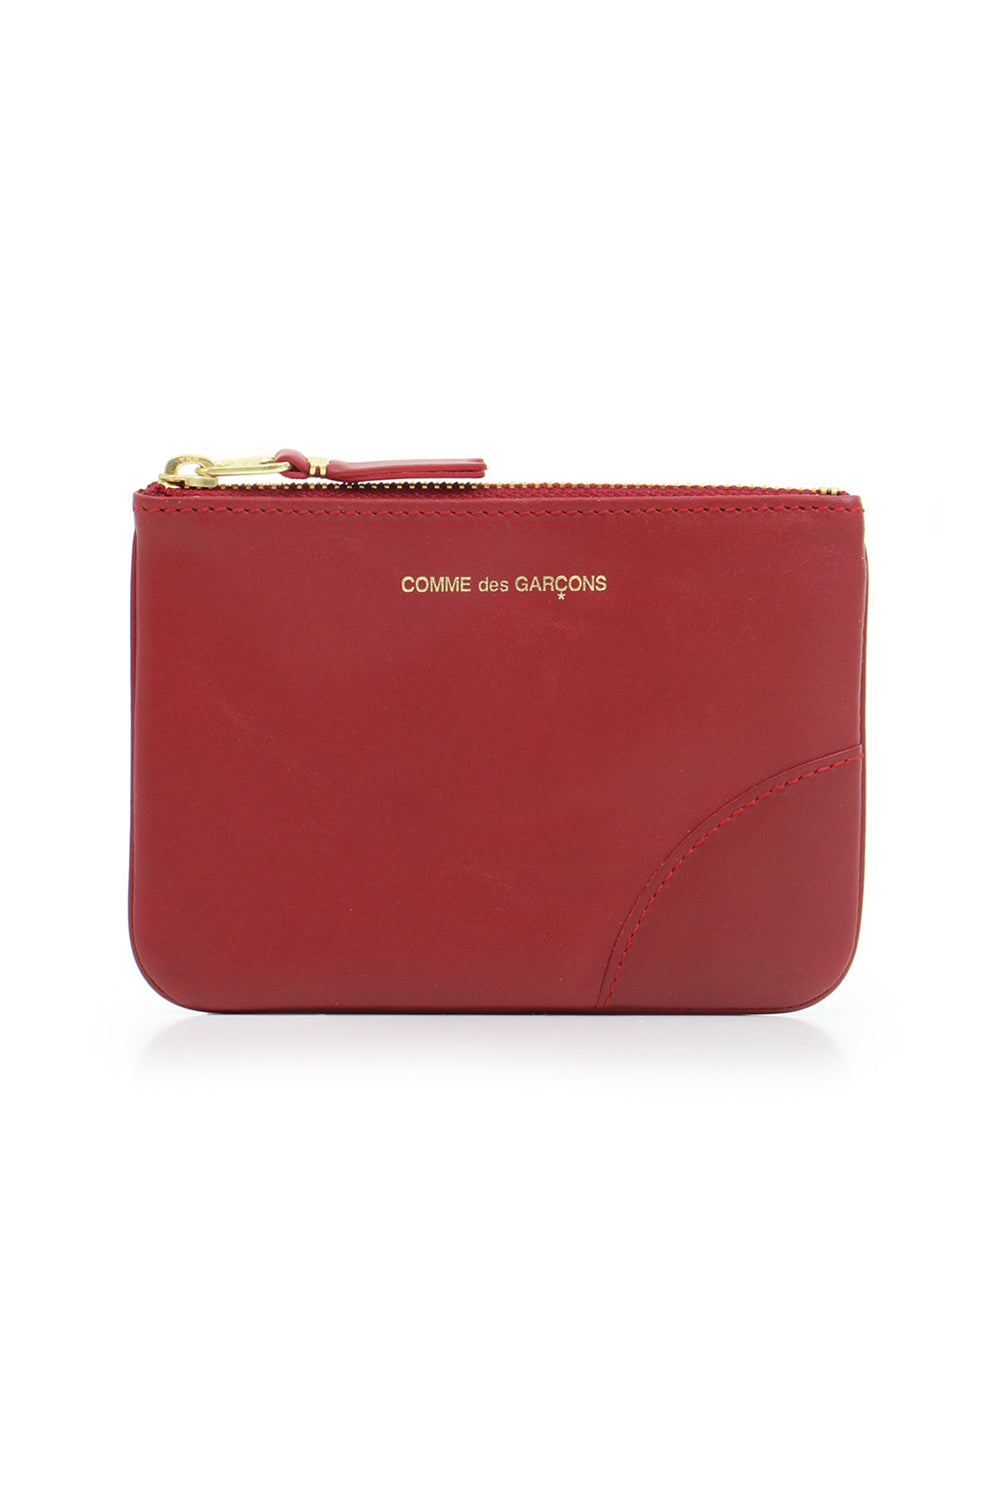 COMME DES GARCONS BAGS RED SMALL CLASSIC LEATHER POUCH RED